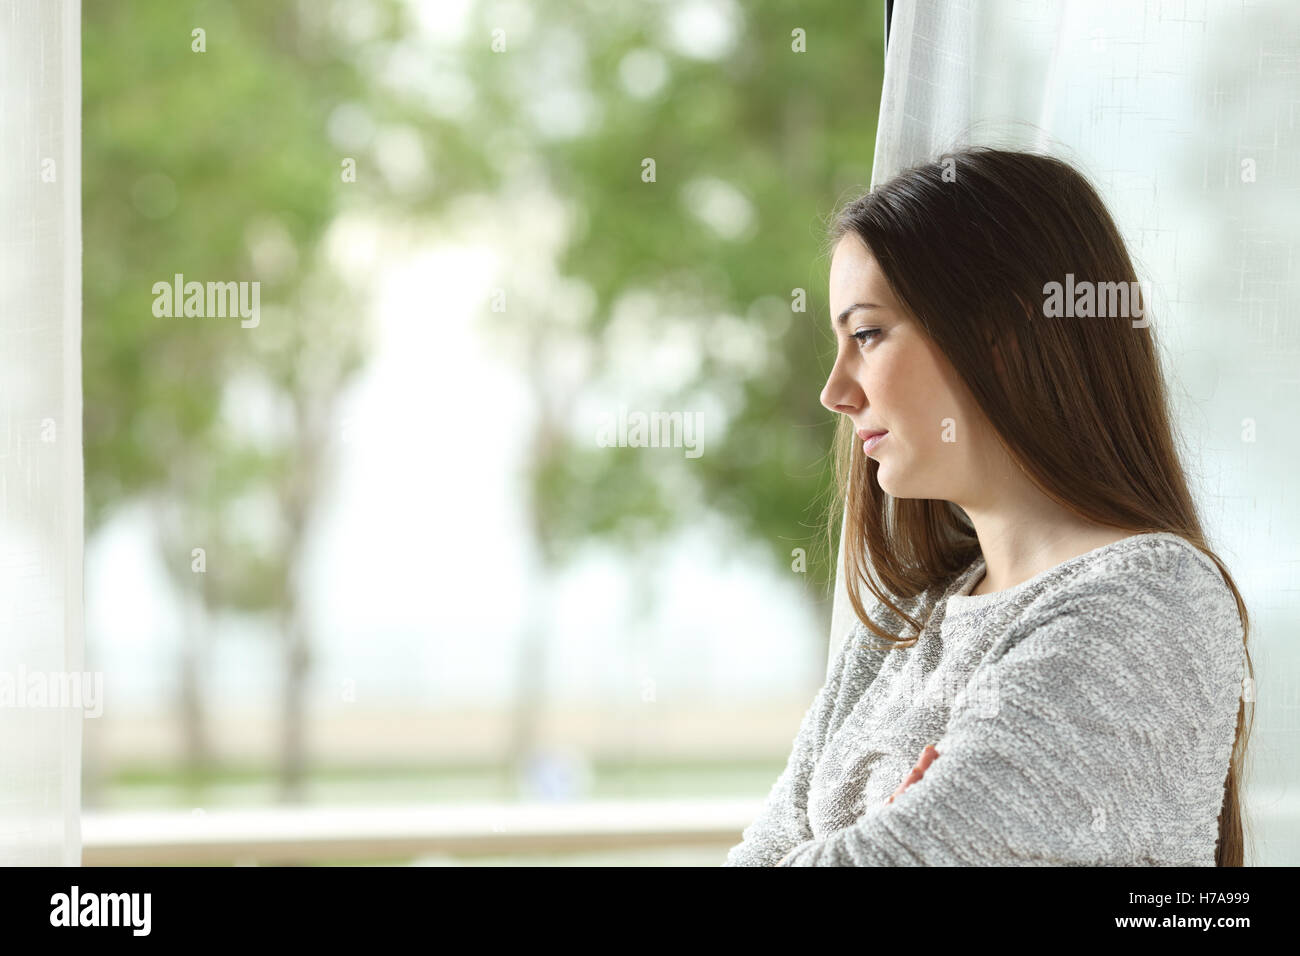 Profile portrait of a longing woman looking outdoors through a window at home or hotel room with a green background Stock Photo